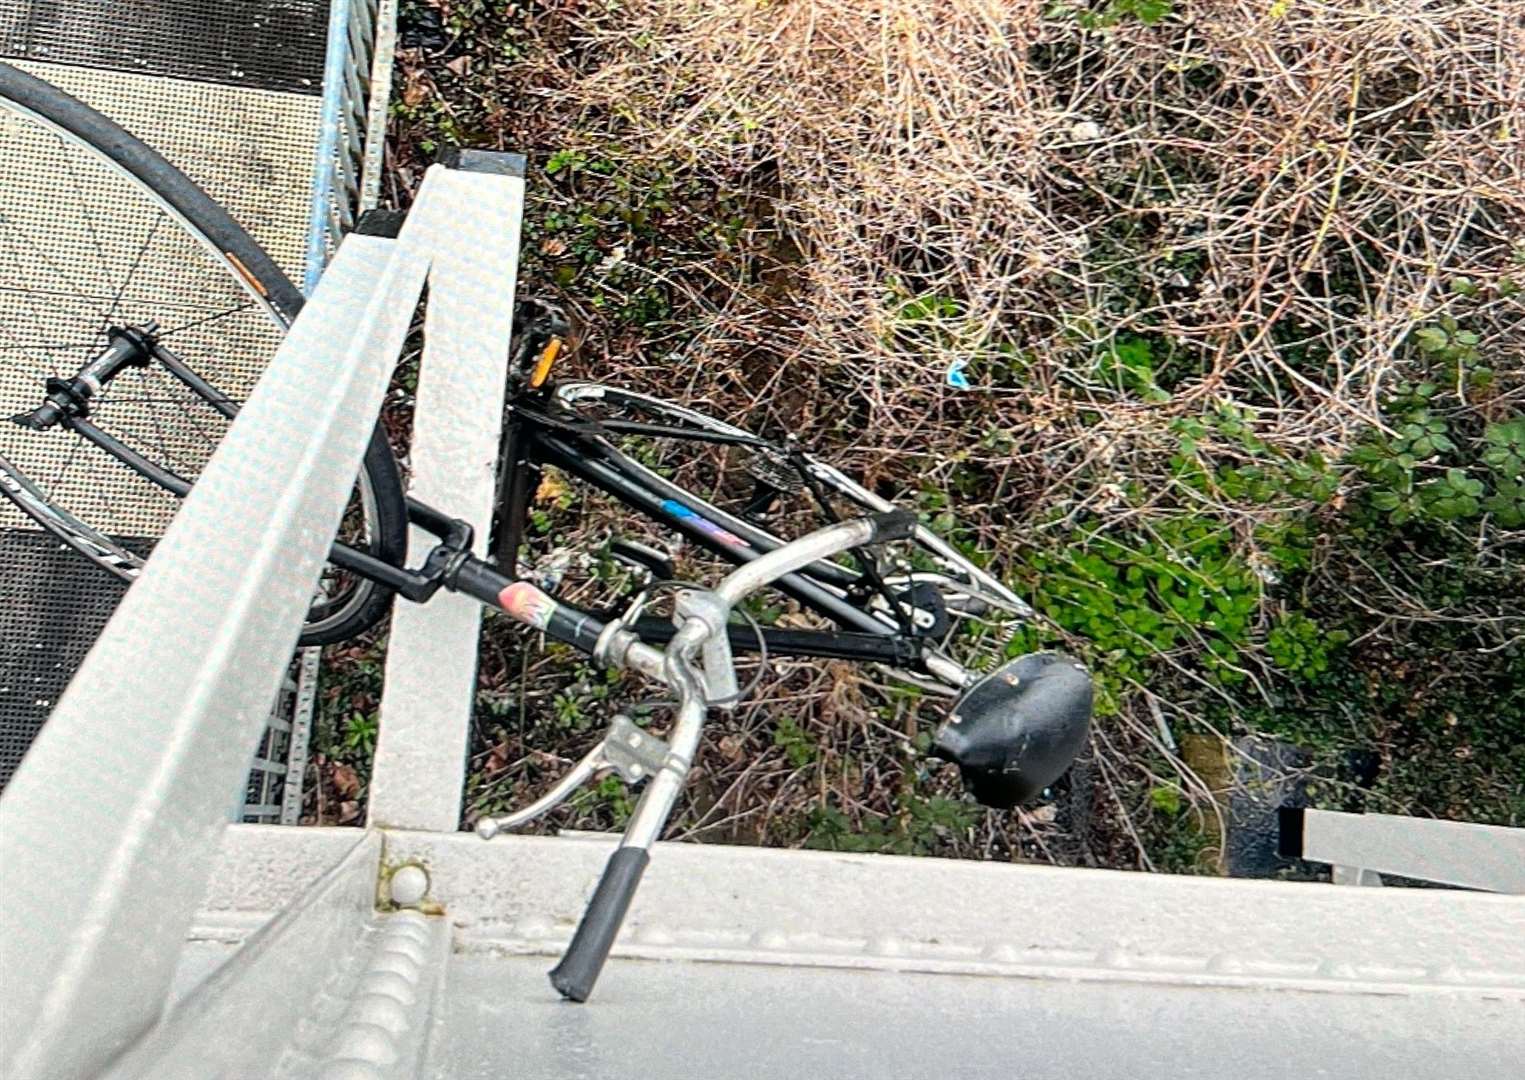 The stolen bike was spotted this morning